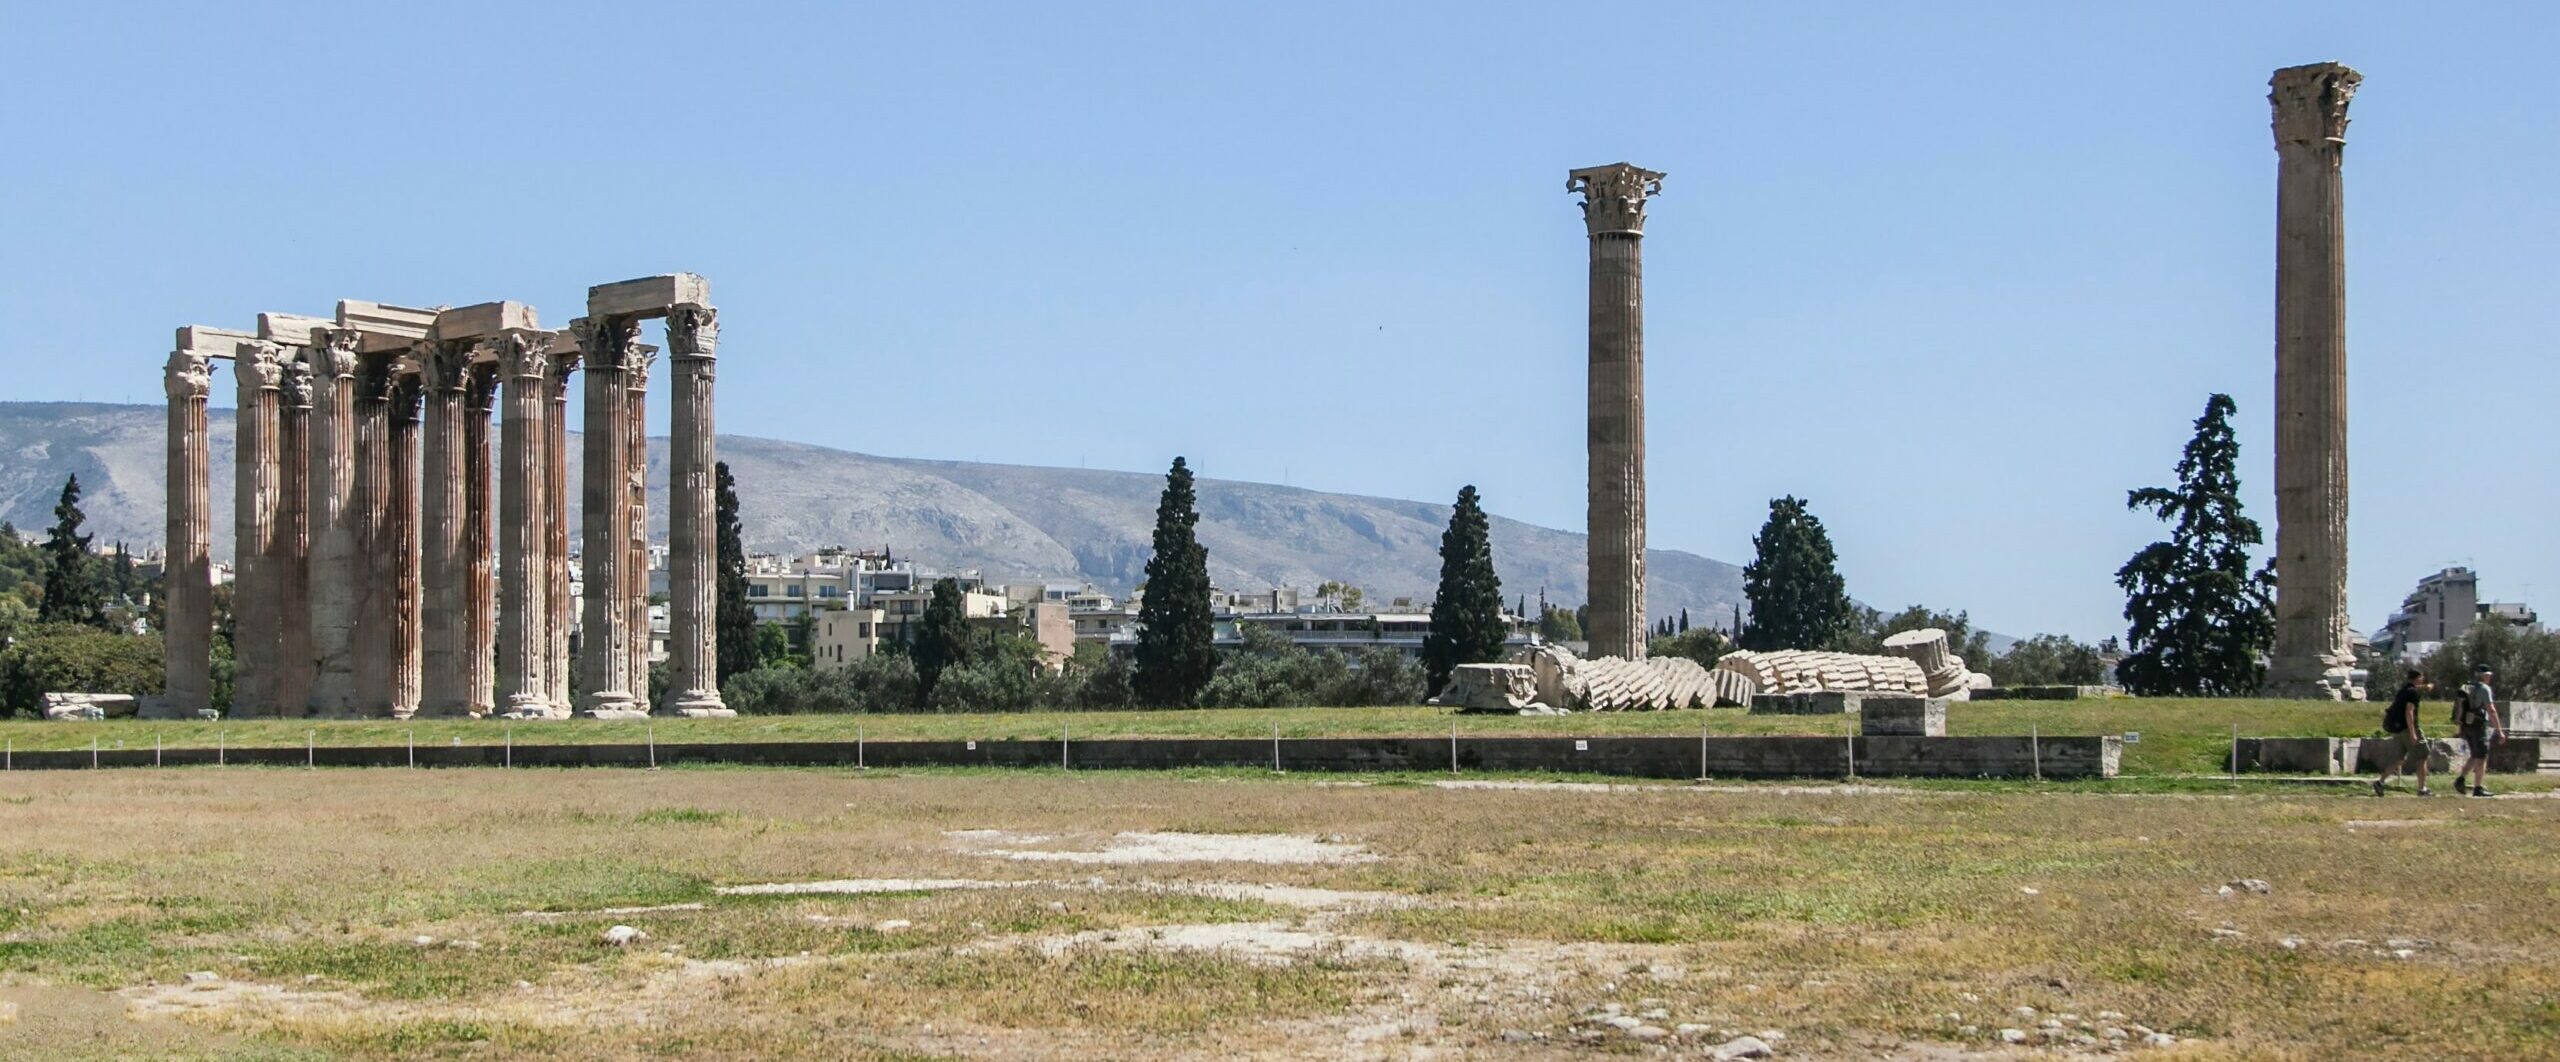 The columns of Olympian Zeus Columns: why it took years to solve the mystery